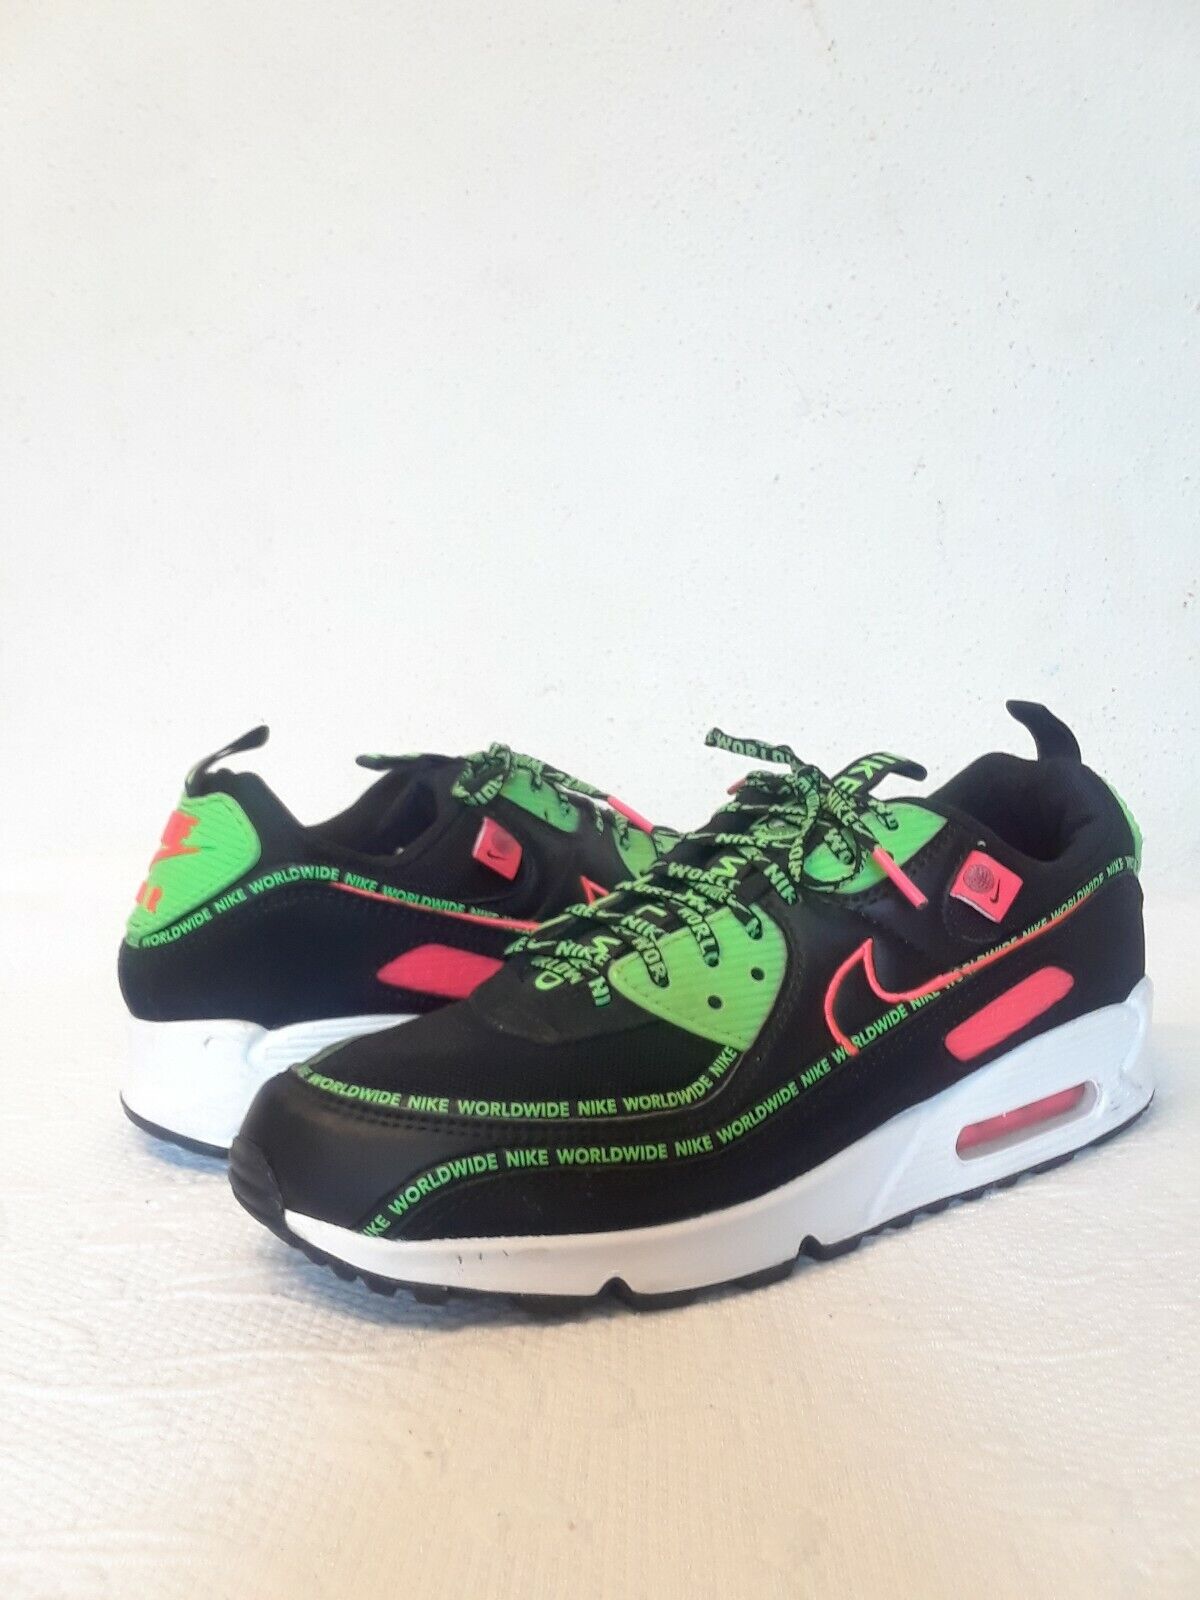 Size 9.5 - Nike Air Max 90 Worldwide Pack Black for sale online | eBay